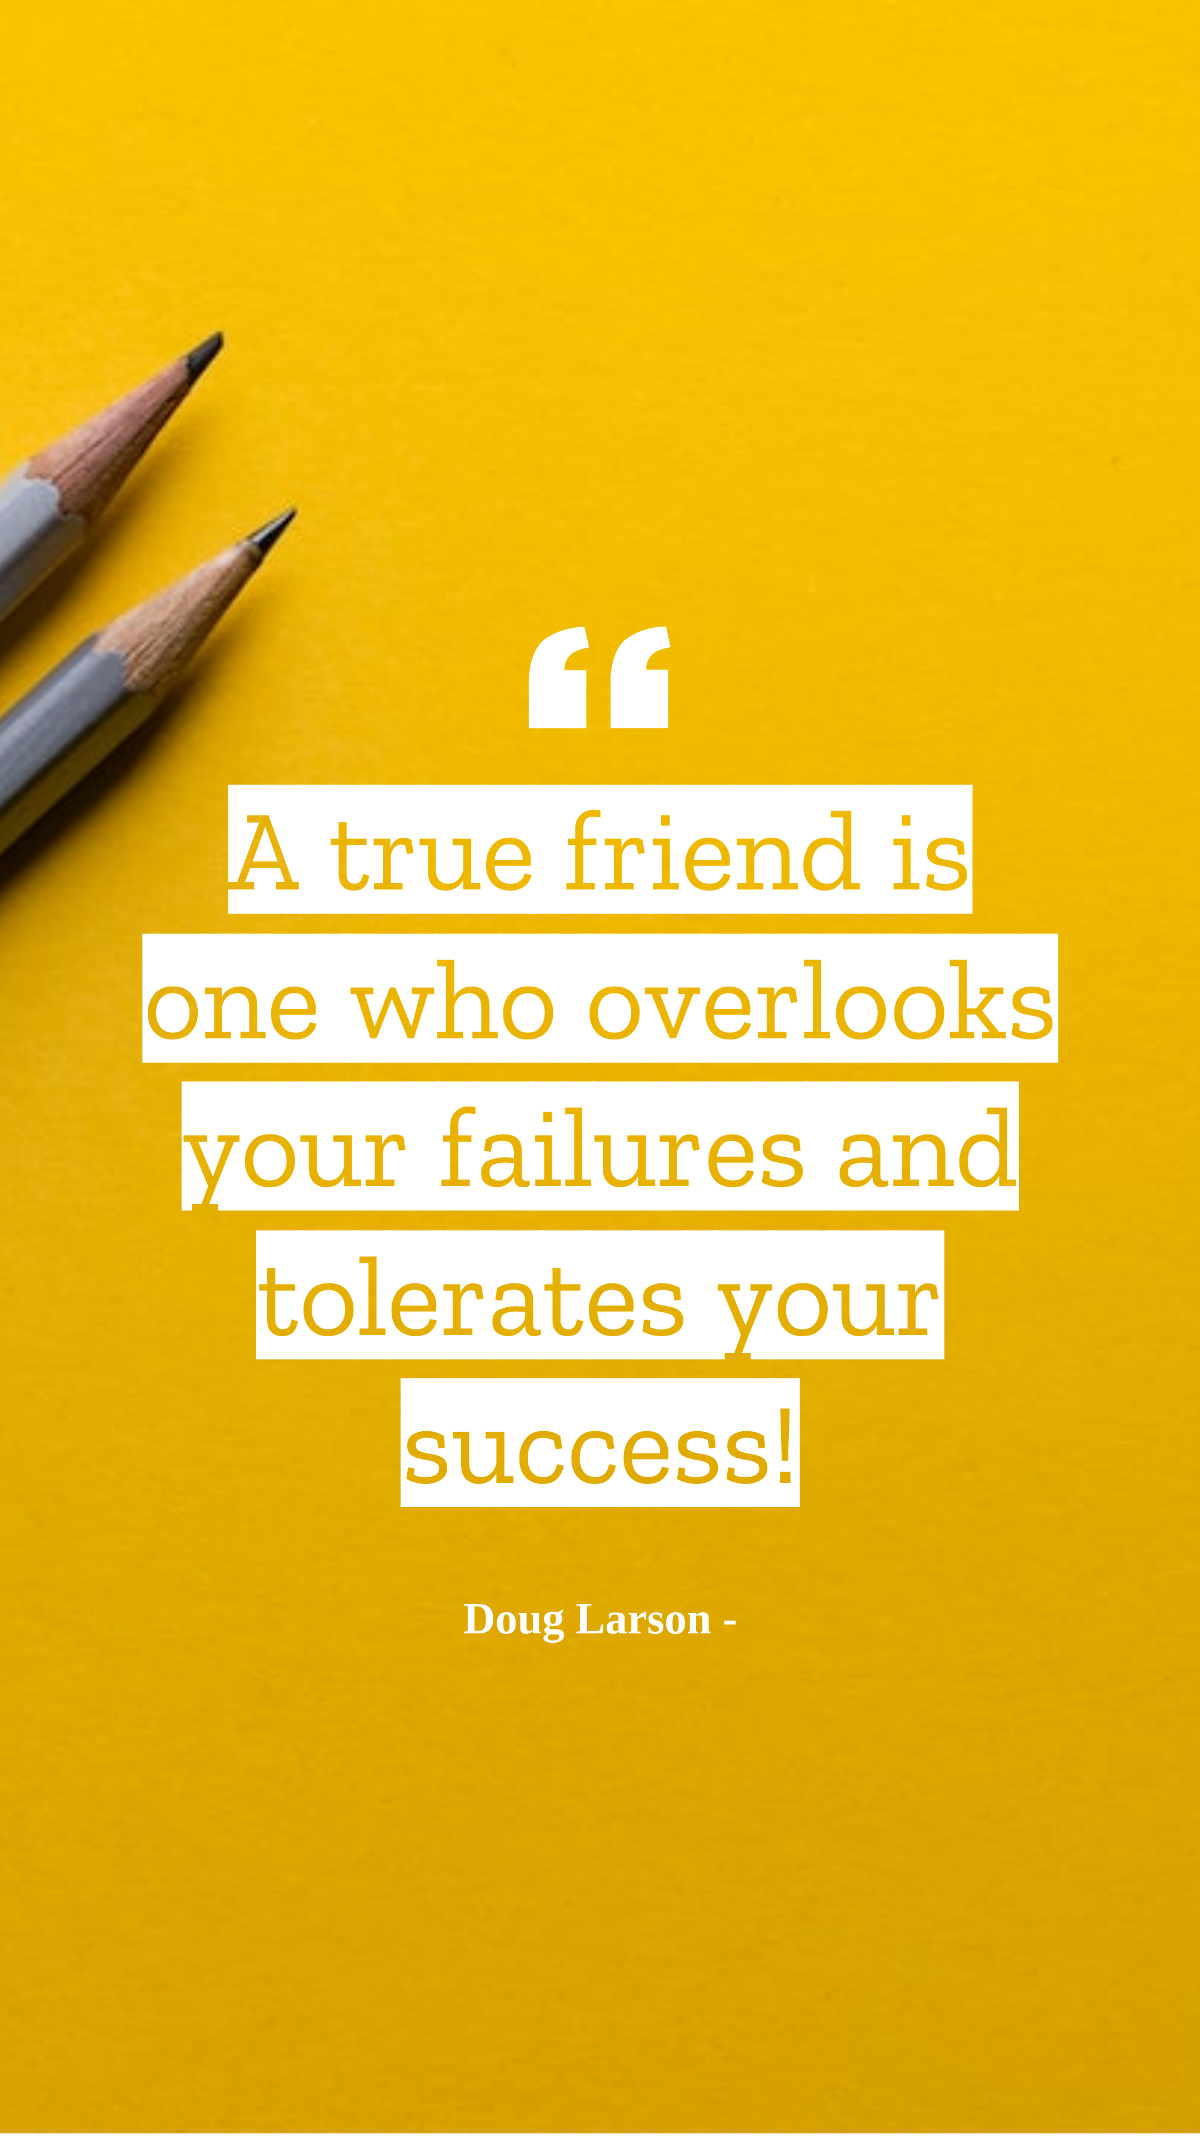 Doug Larson - A true friend is one who overlooks your failures and tolerates your success! Template